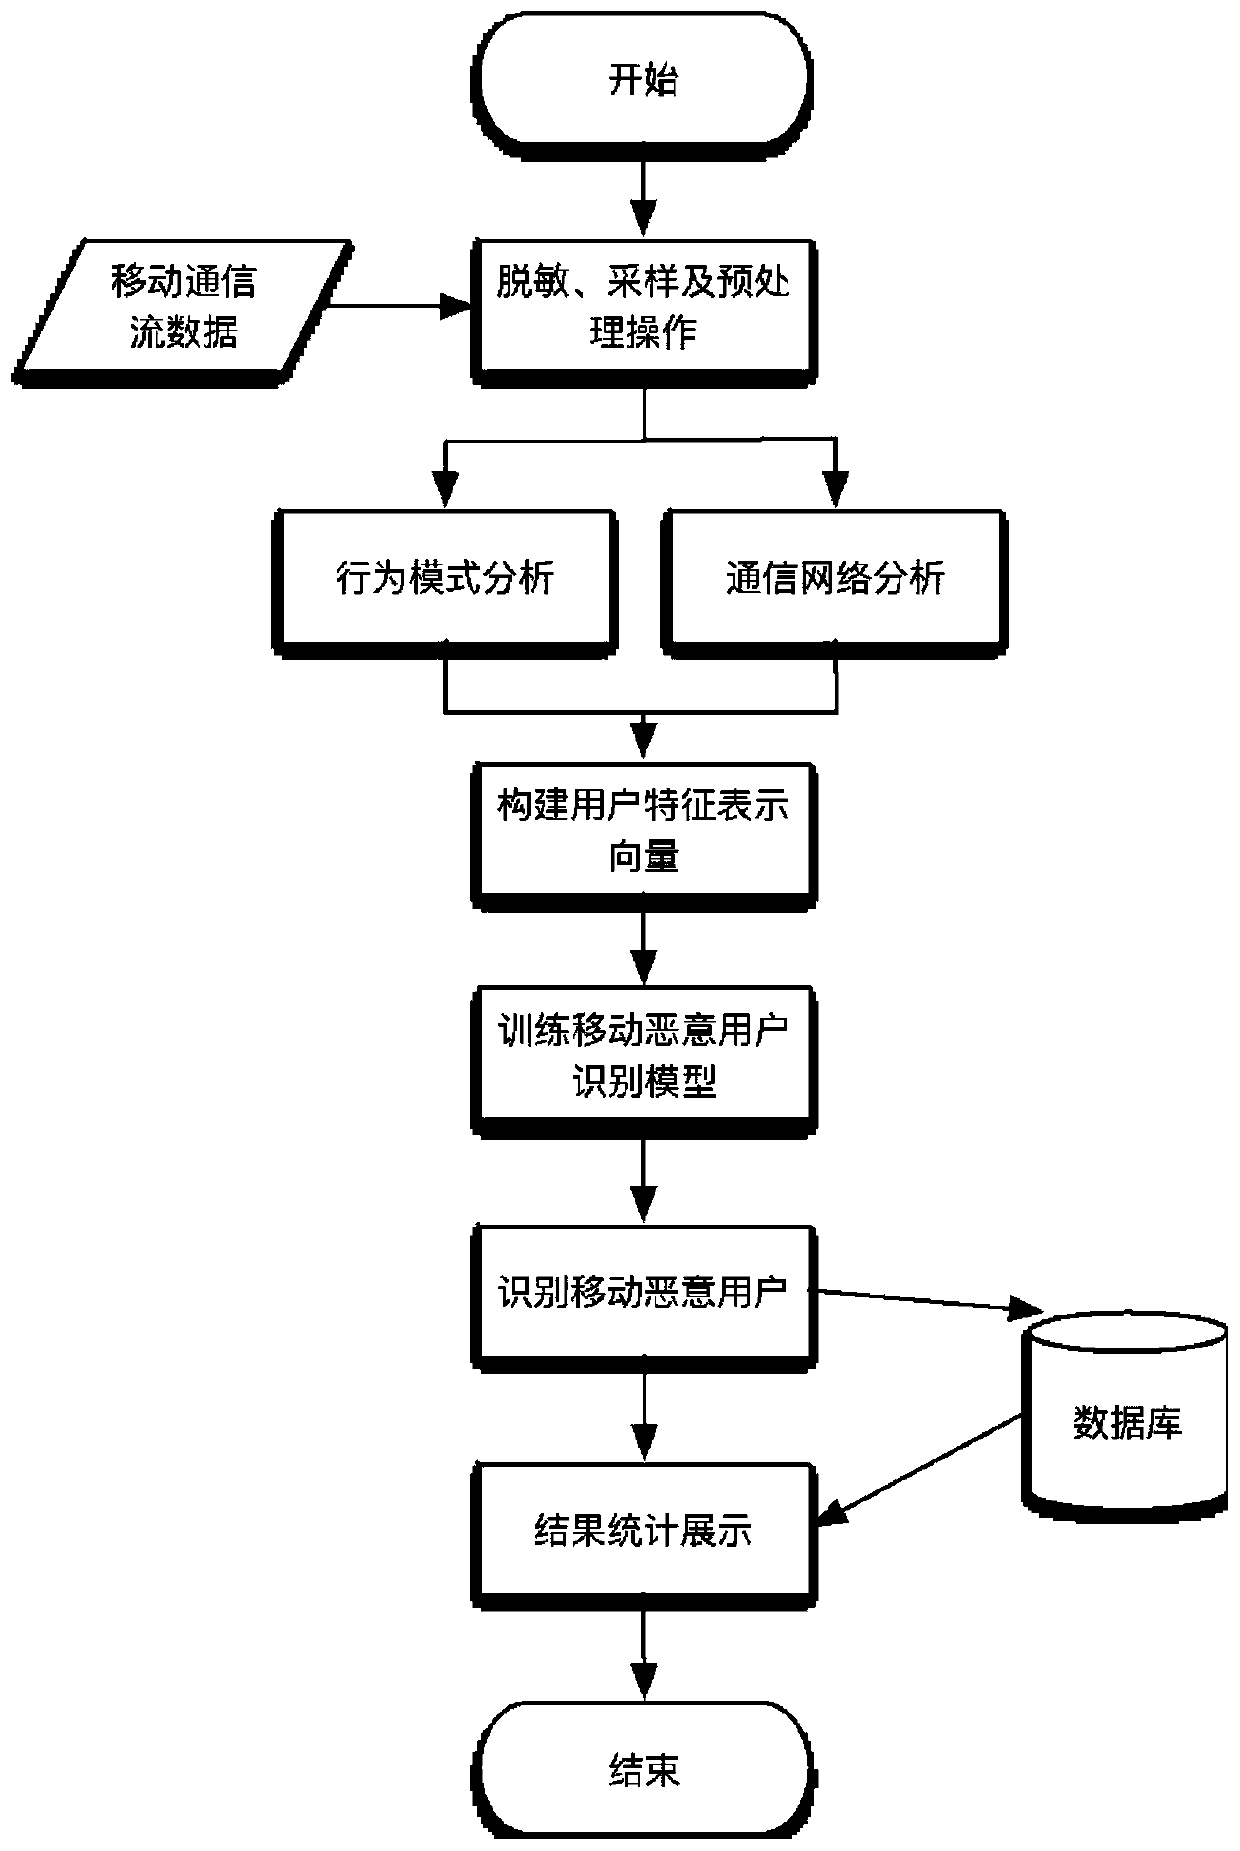 Mobile malicious user identification method and system based on communication behavior rule